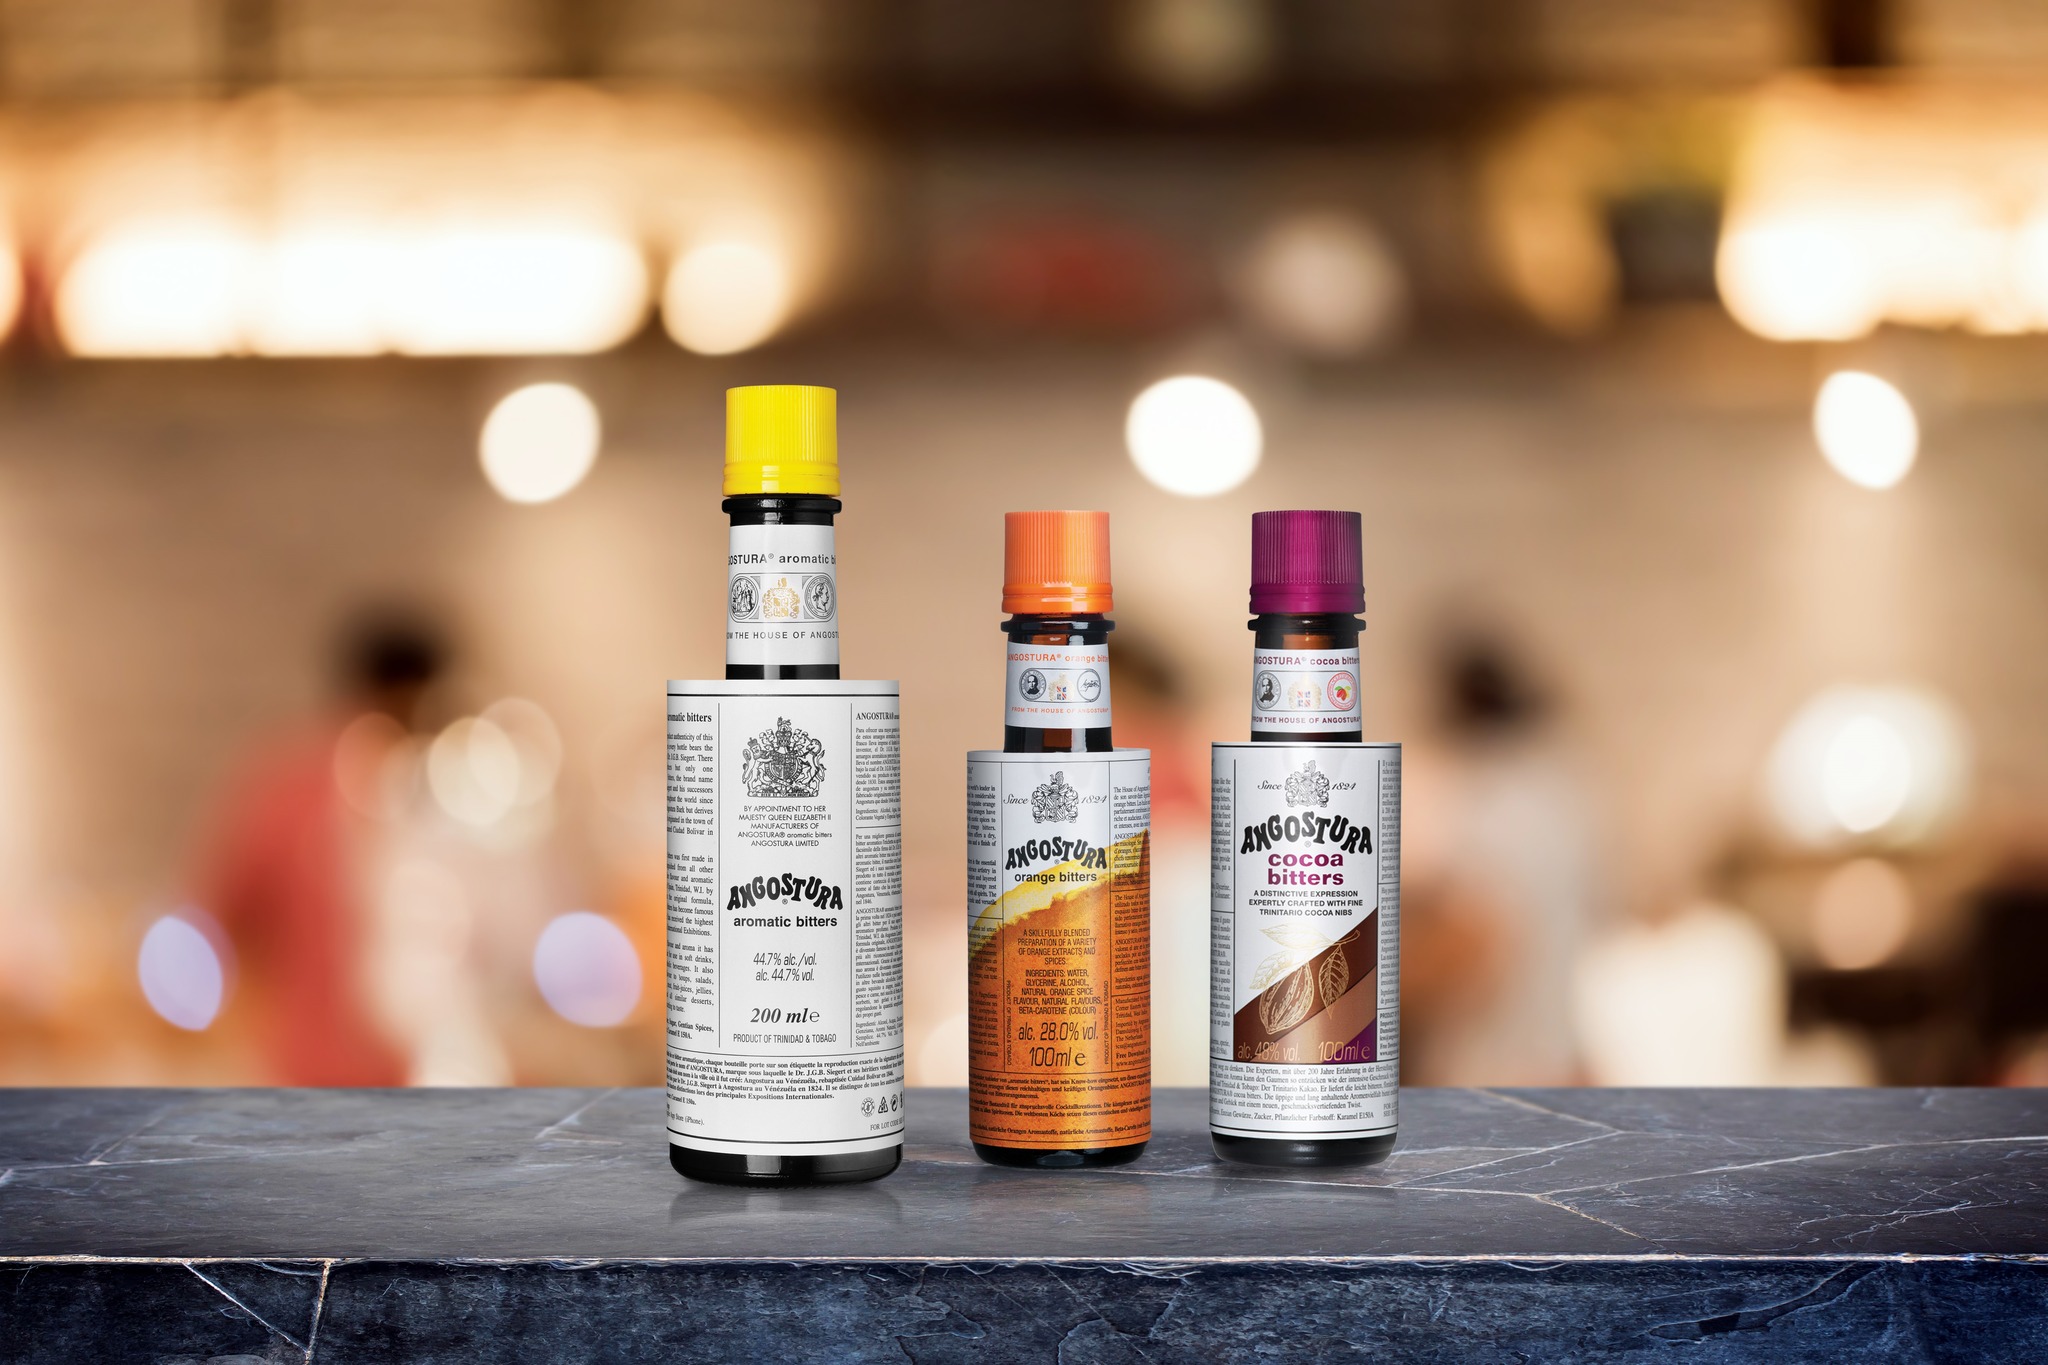 Angostura to release new products as it celebrates 200-year anniversary this year